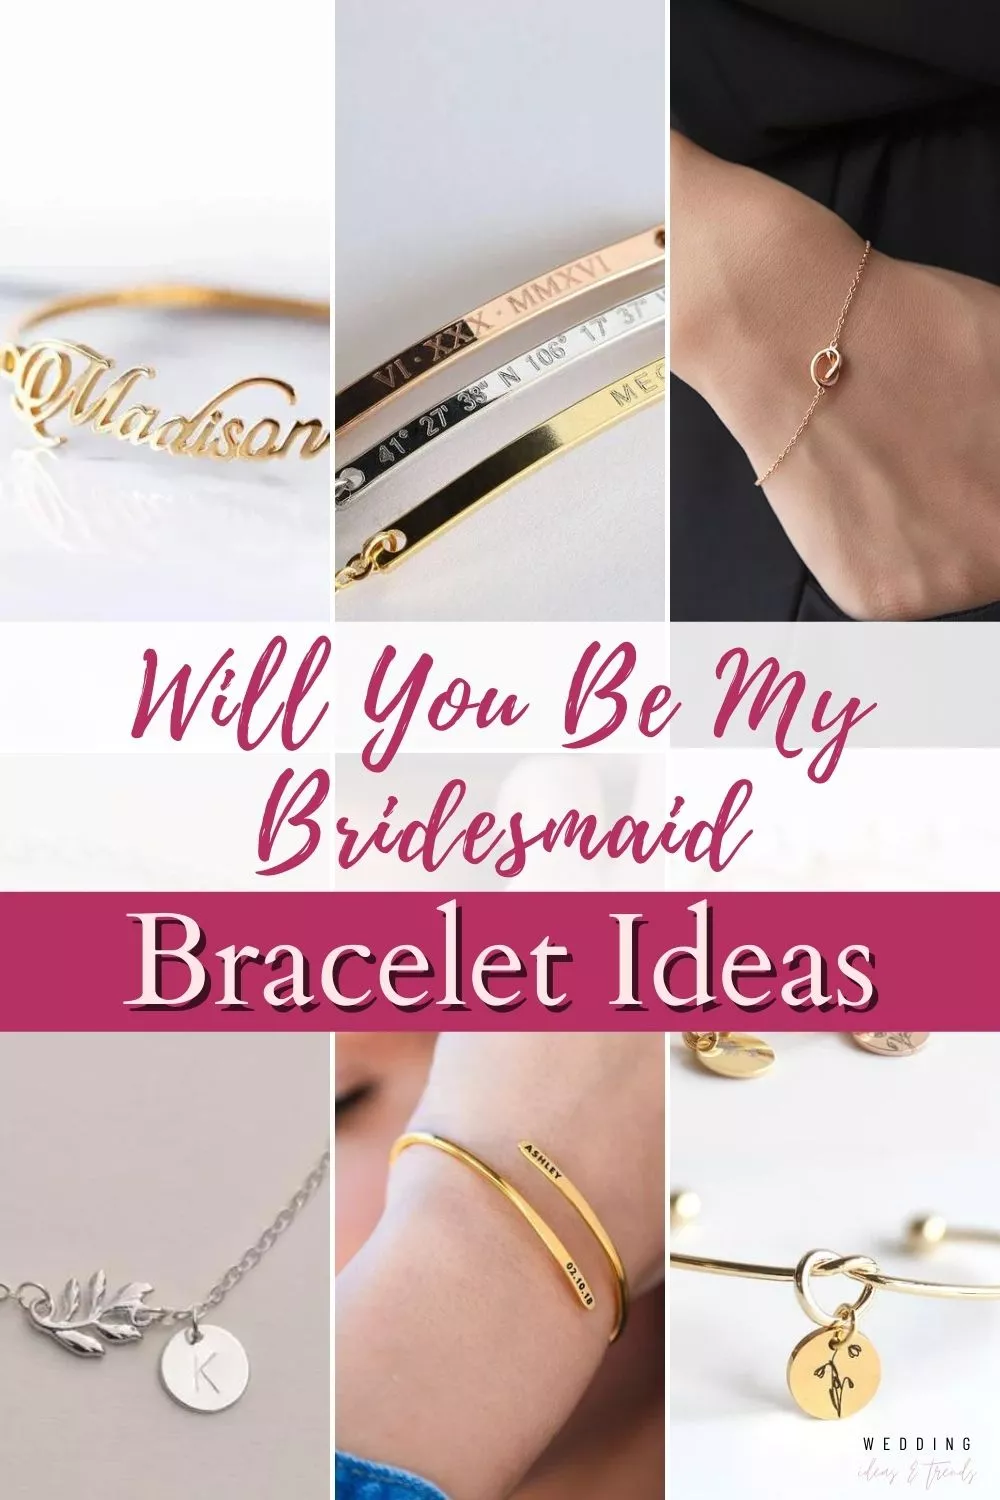 Find the perfect will you be my bridesmaid bracelets to use as a proposal gift, that they will keep forever. Check out our stunning ideas in different price ranges.